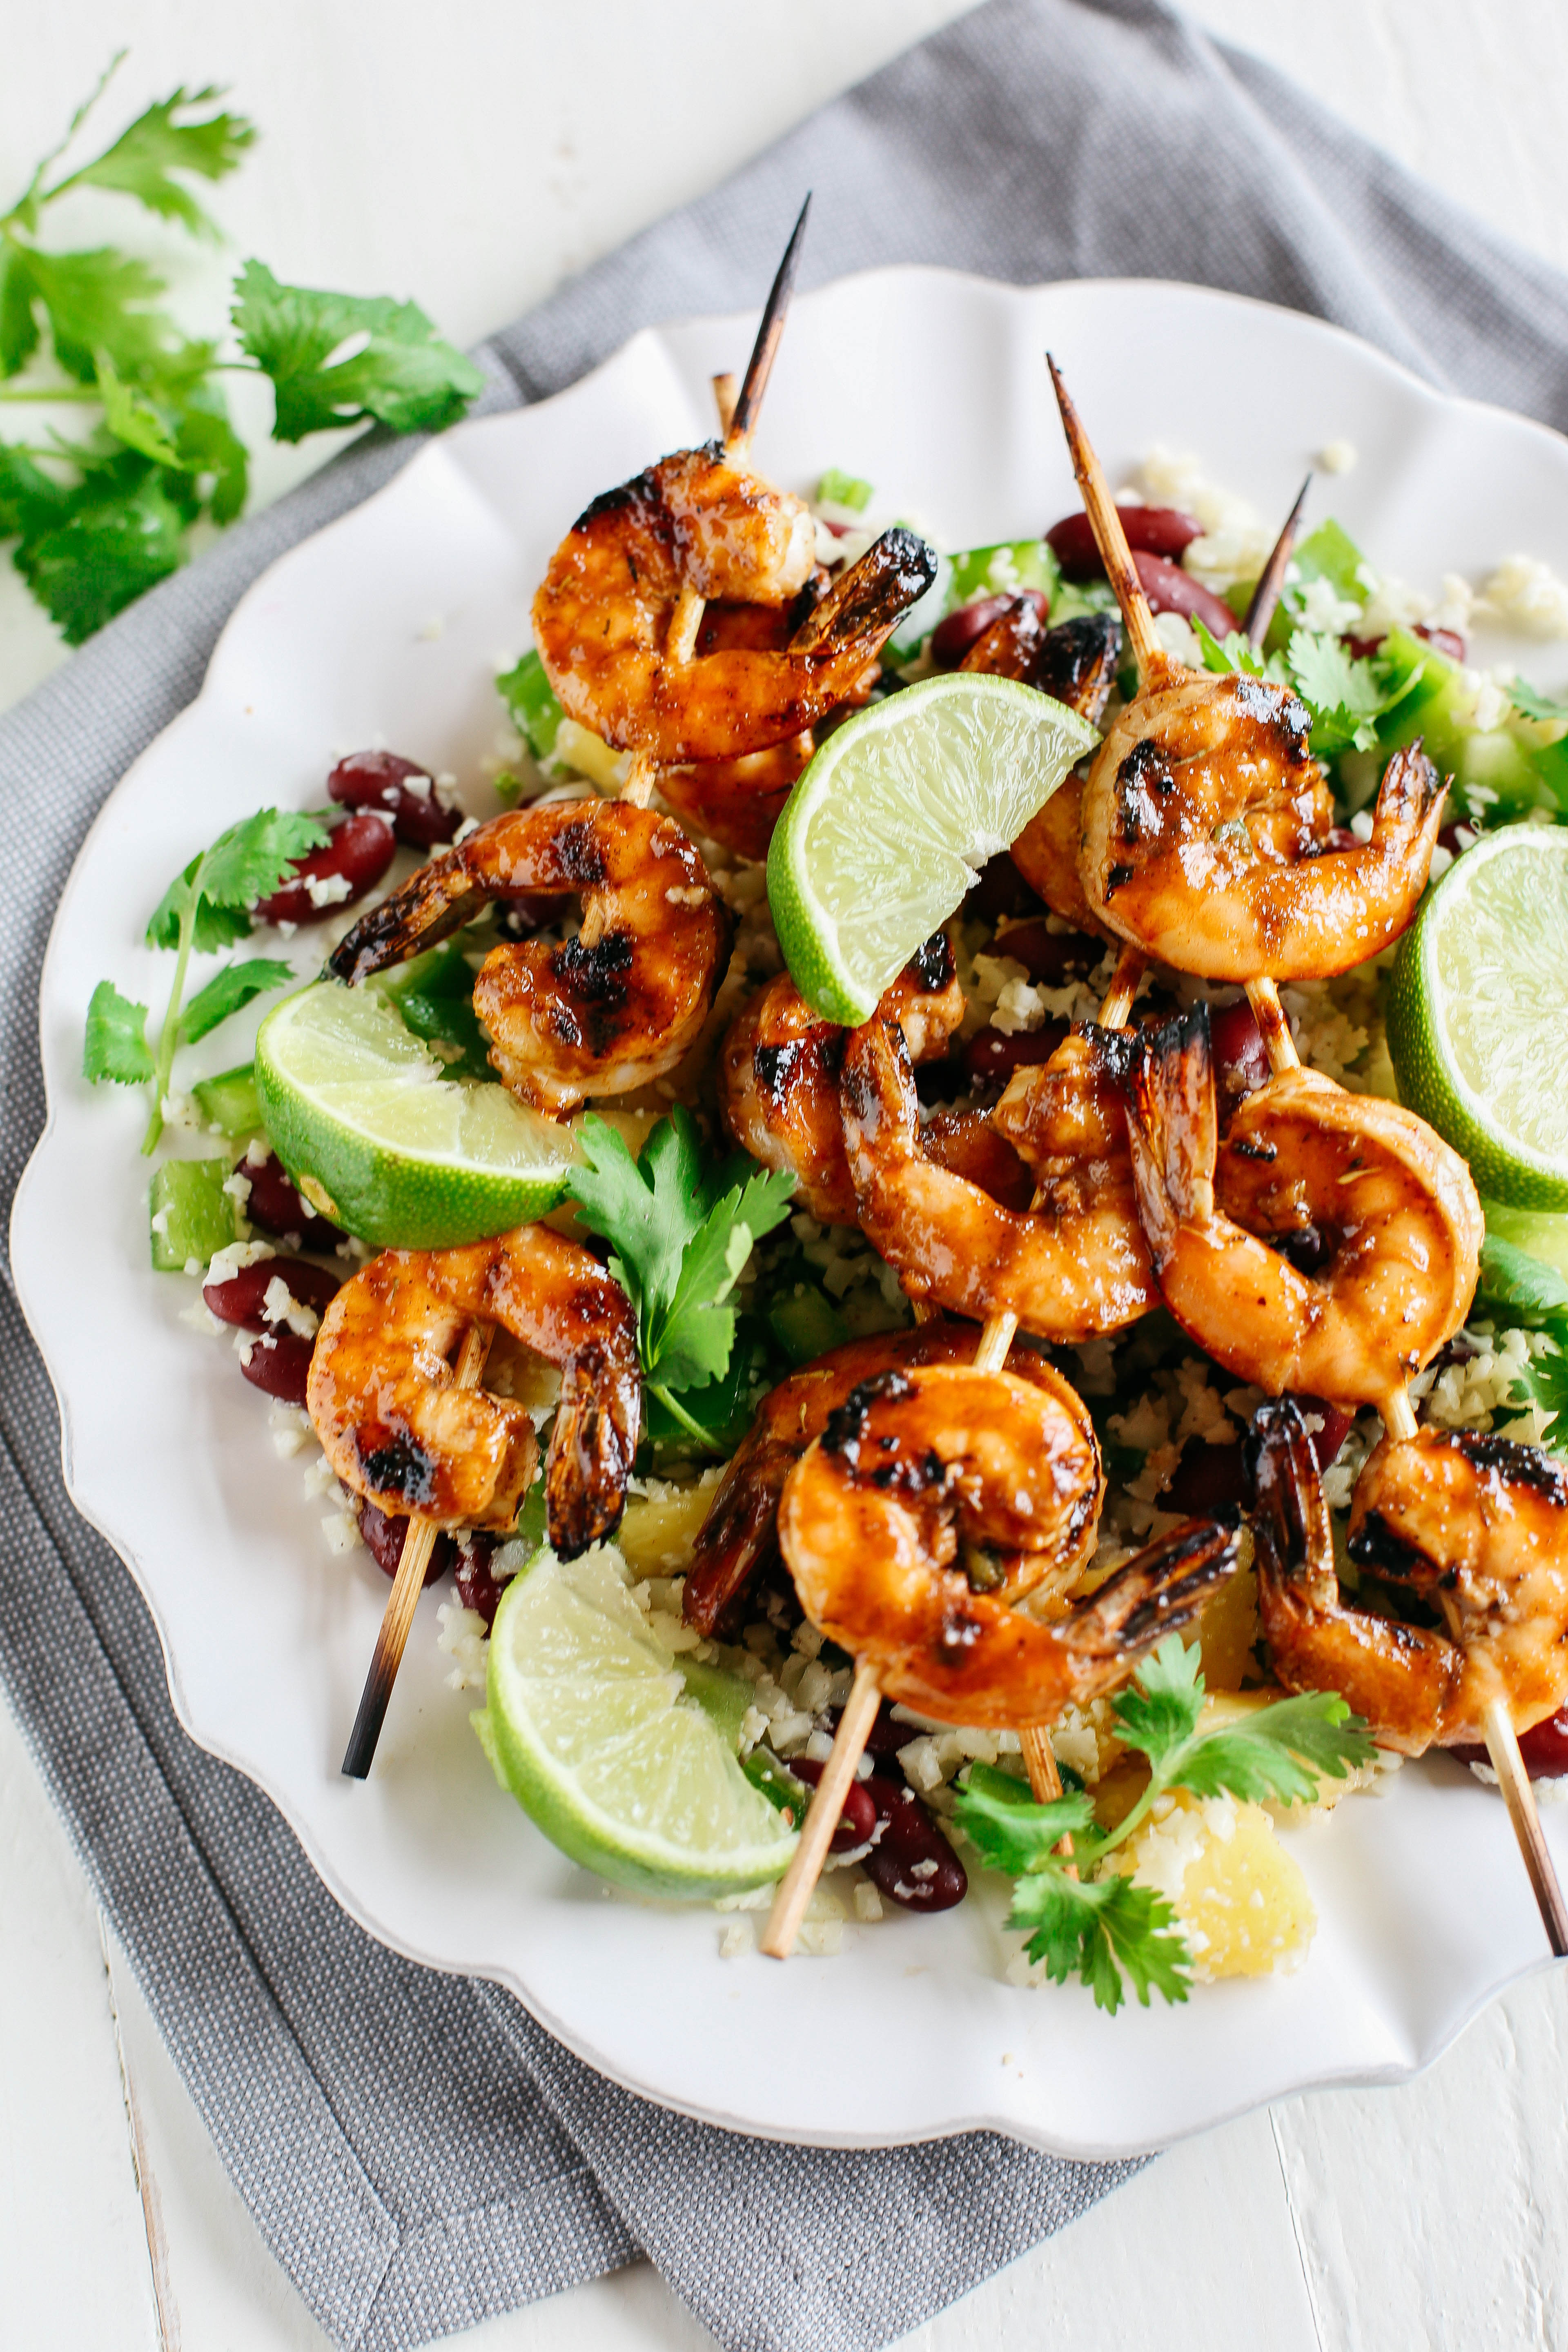 This Caribbean Jerk Shrimp with Cauliflower Rice is super flavorful, deliciously filling and perfect for weekly meal prep!